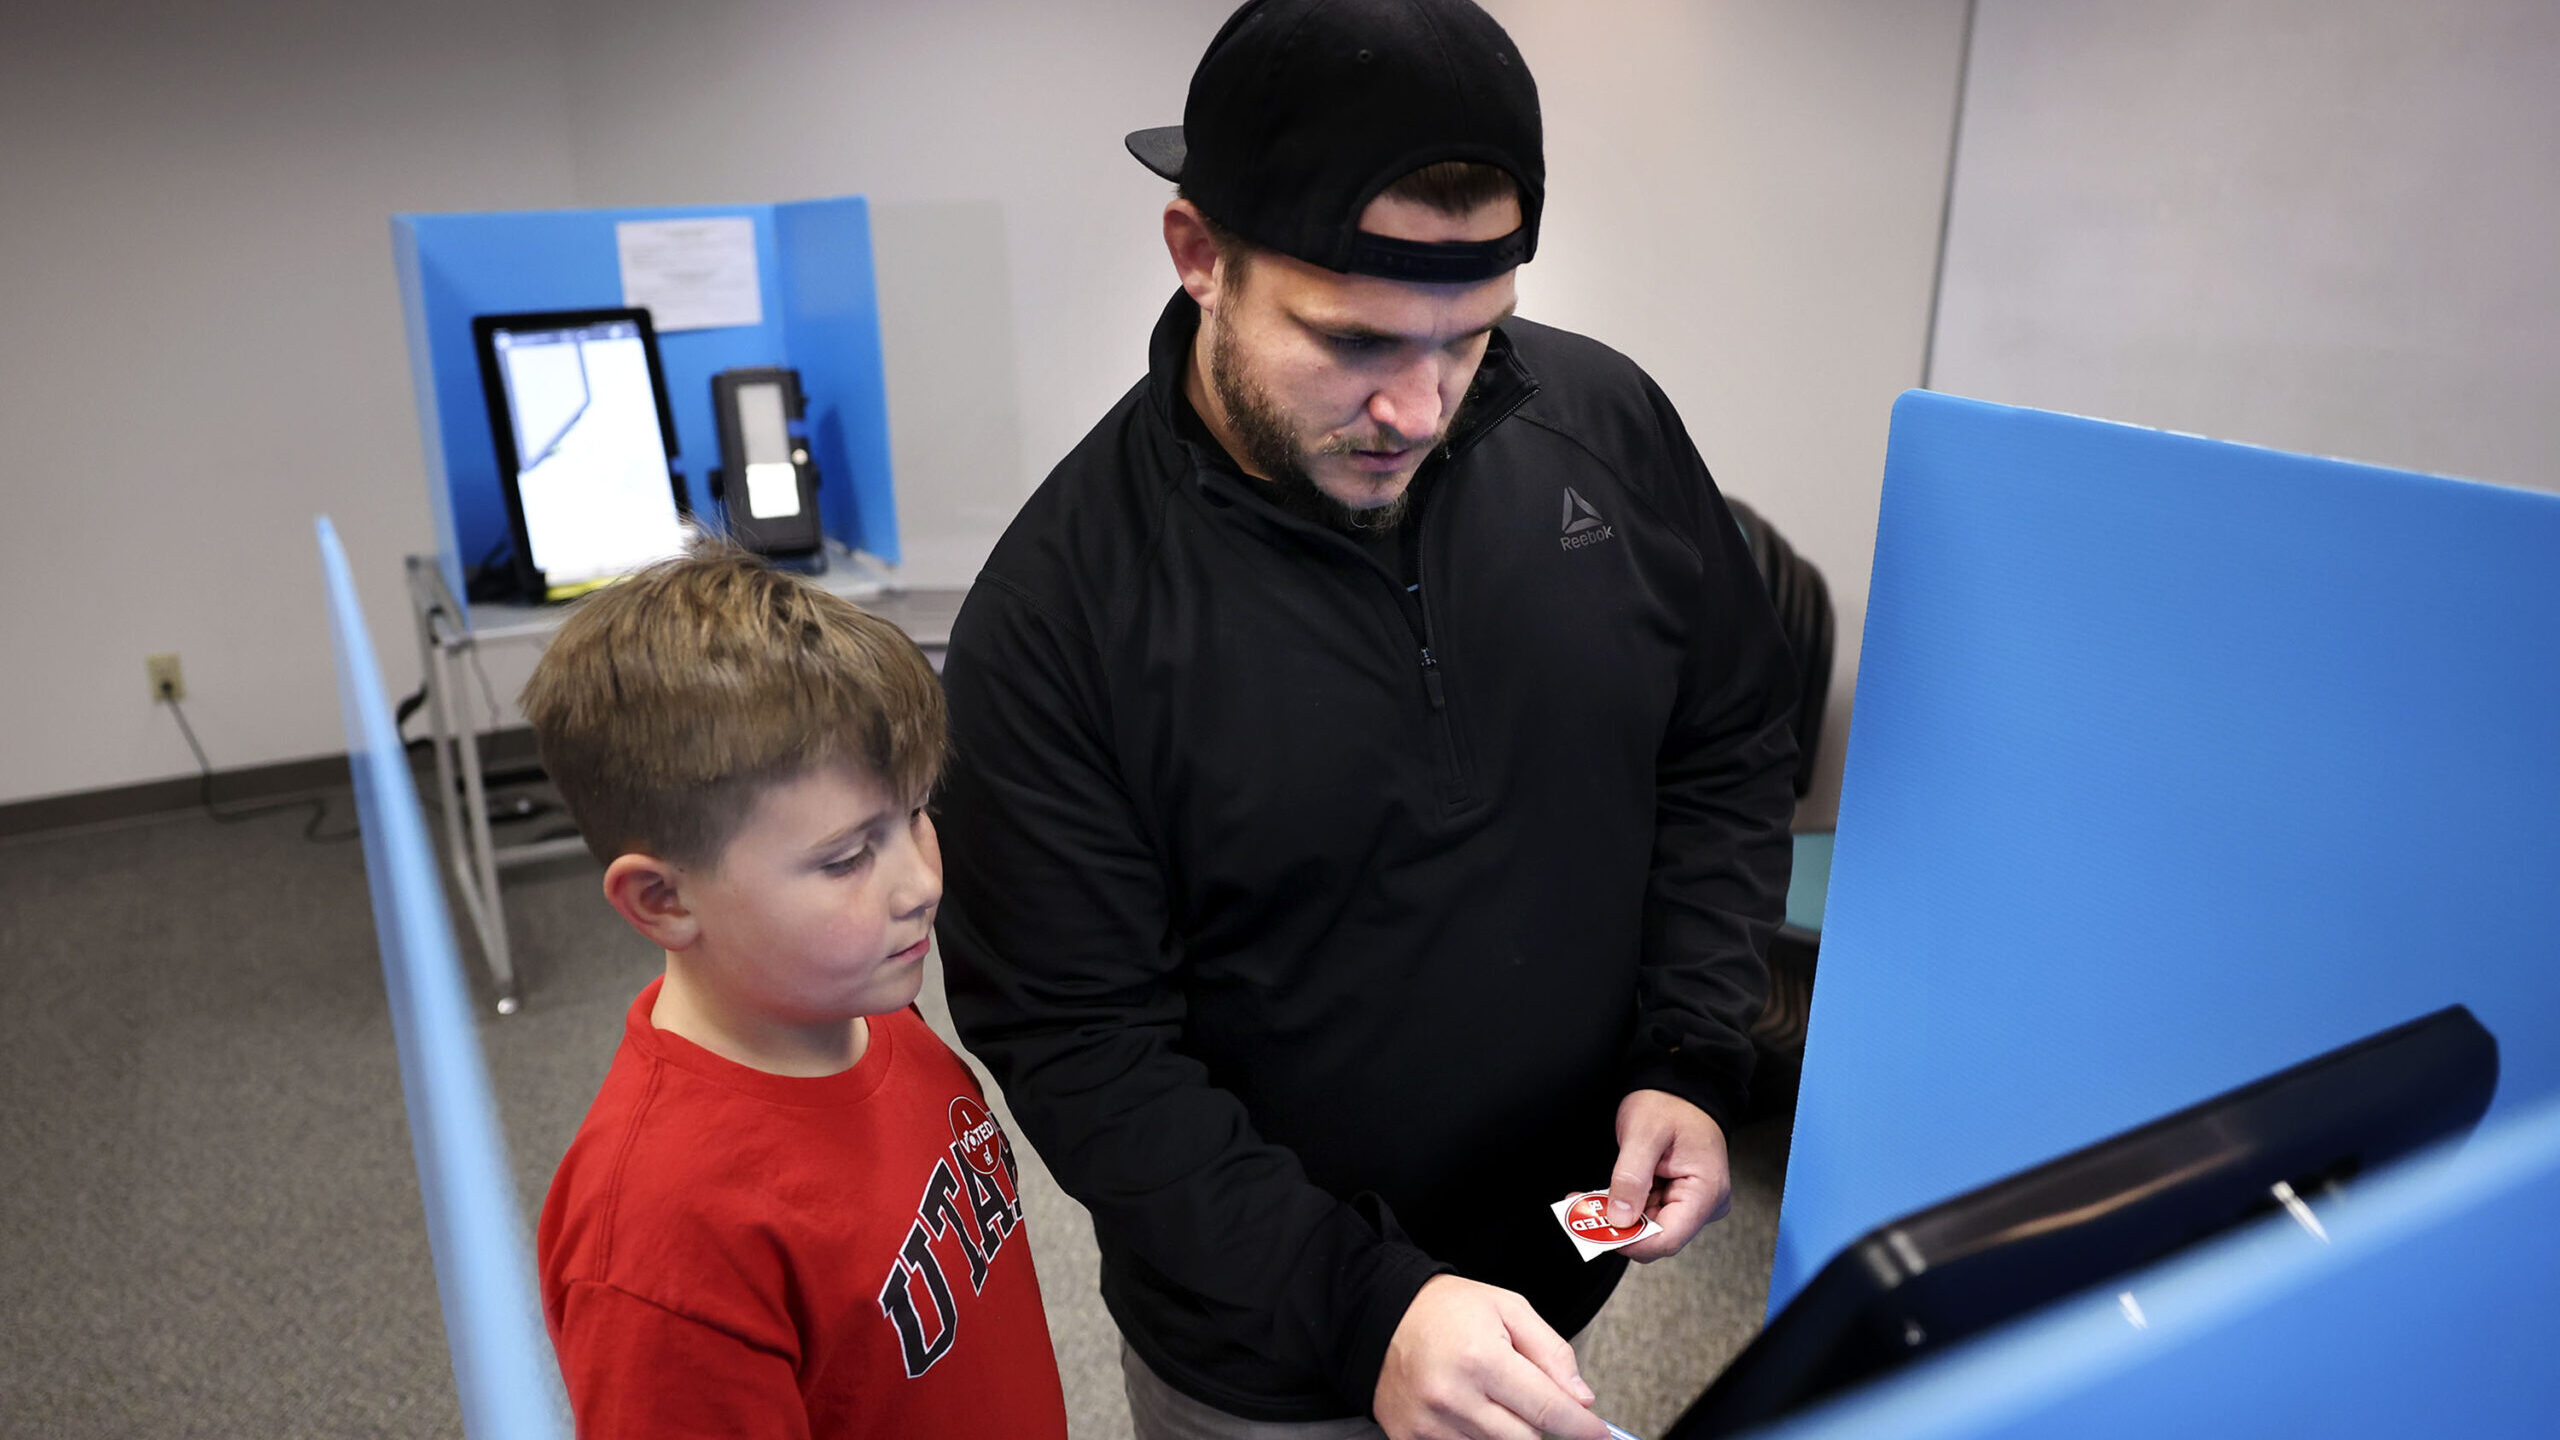 Cooper Brannon, 8, watches his father, Austin, vote at the Salt Lake County Government Center in Sa...